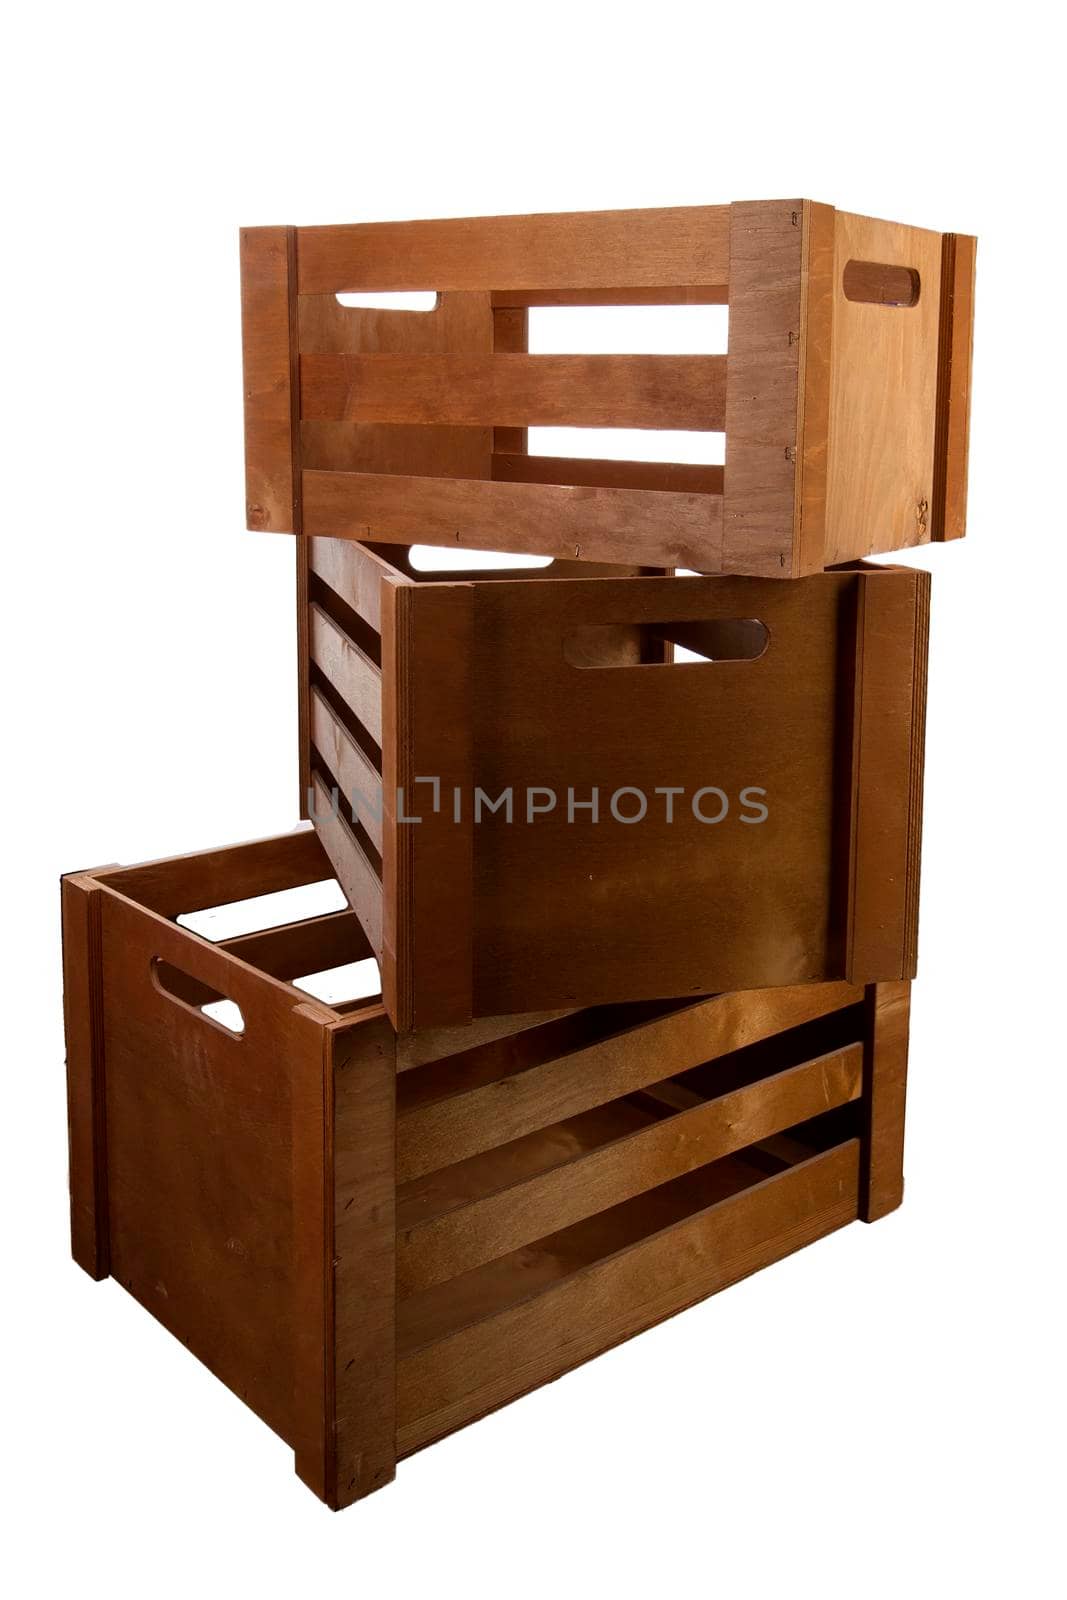 Three wooden crates. Boxes for packing goods